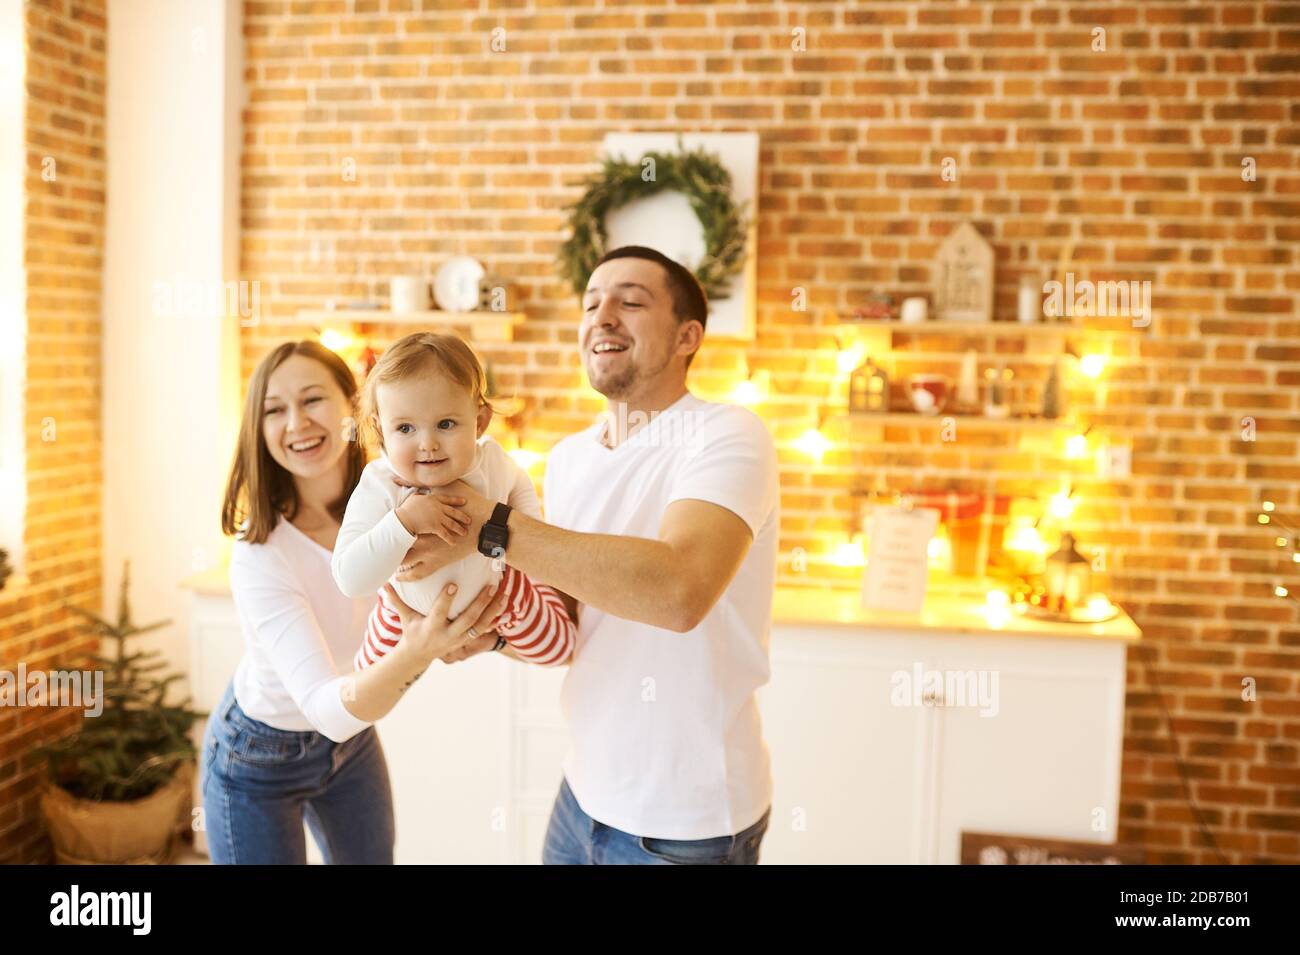 Christmas background. Young family with a small child having fun at Christmas at home. Stock Photo